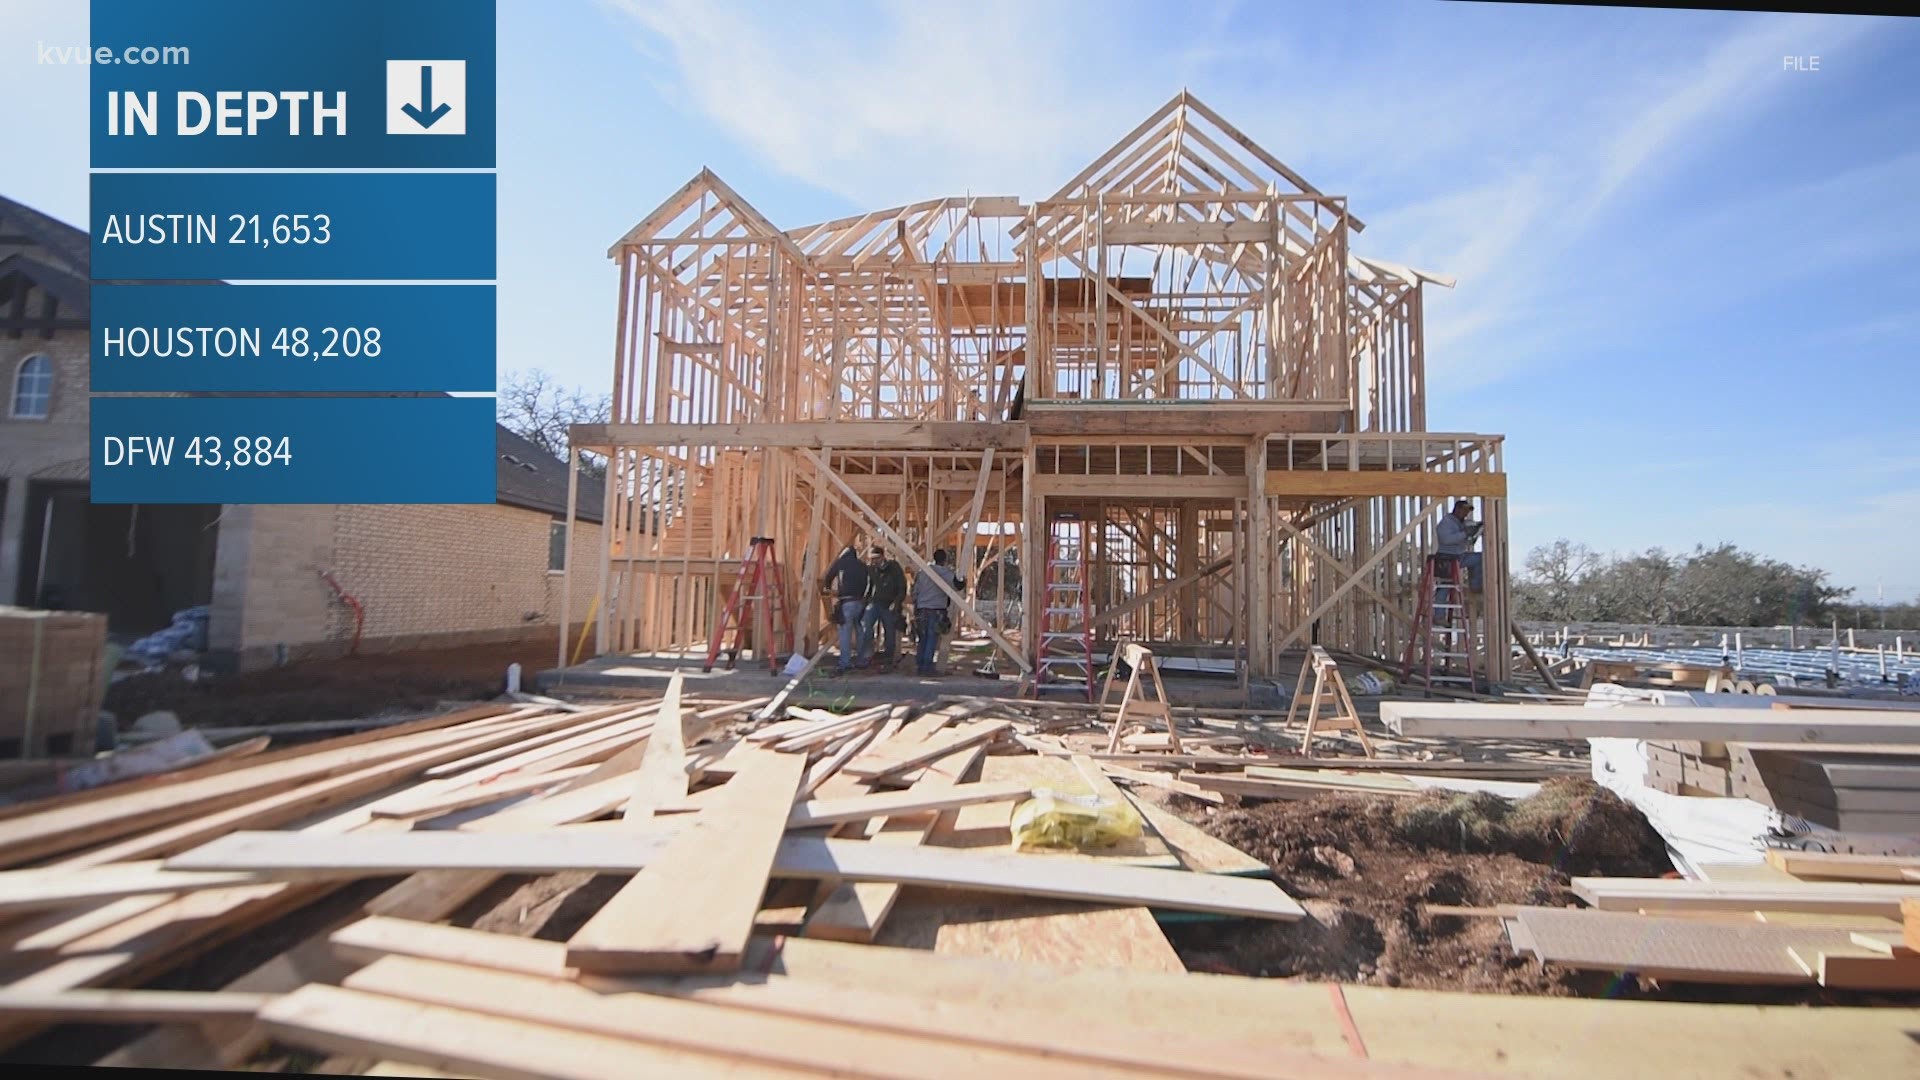 Builders filed permits for nearly 22,000 single-family homes in 2020, putting Austin among the top five U.S. metro areas for construction permits.